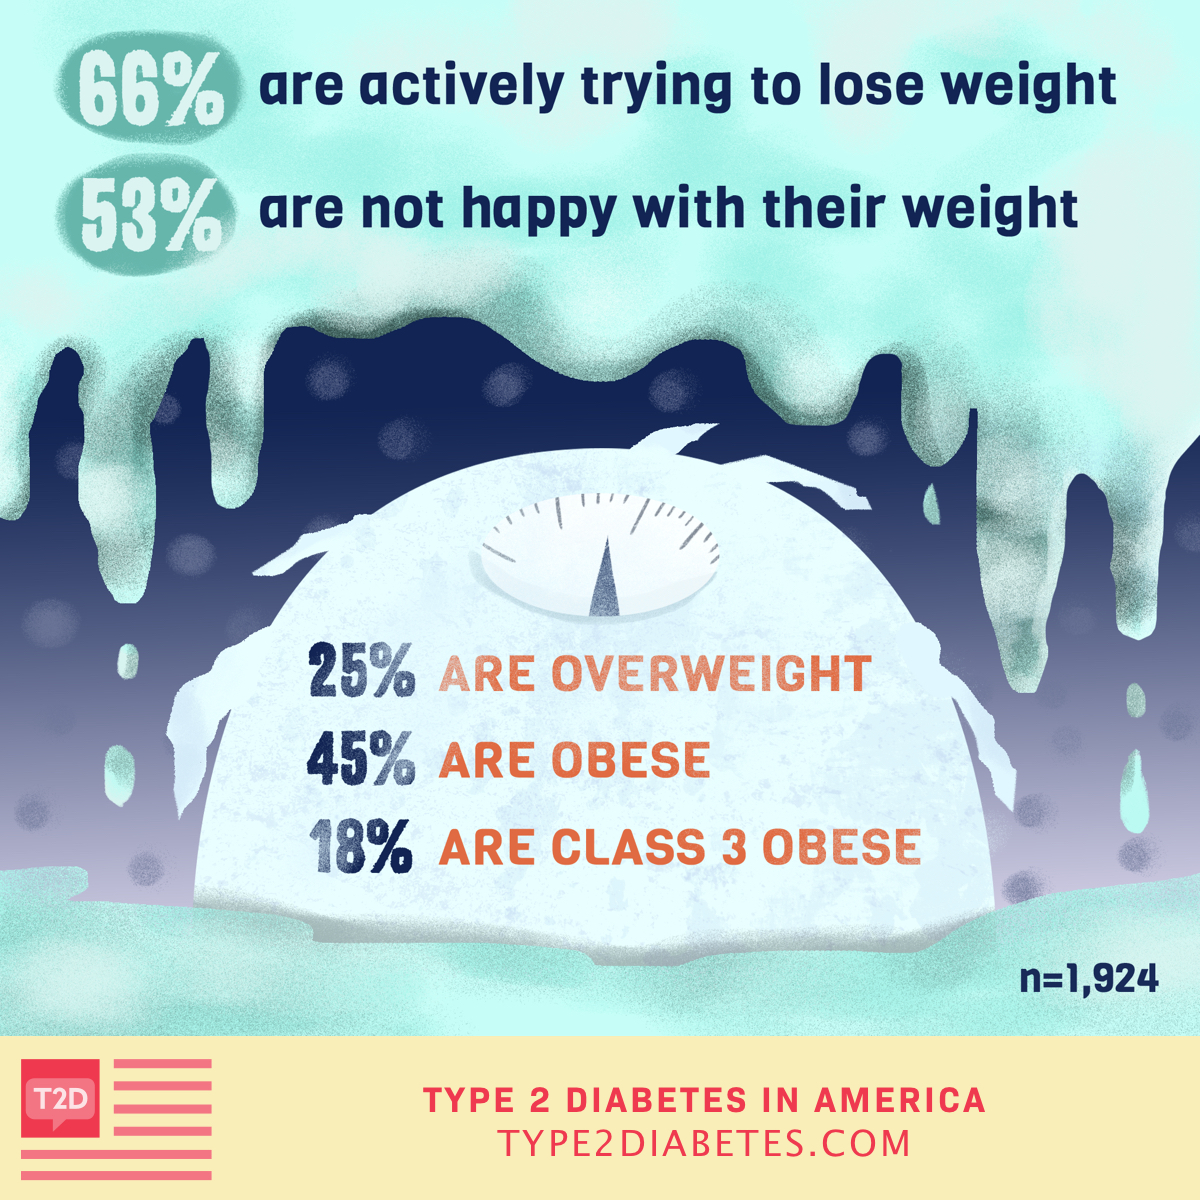 53% of people with type 2 diabetes are unhappy with their weight. 45% are obese and over half are actively trying to lose weight.